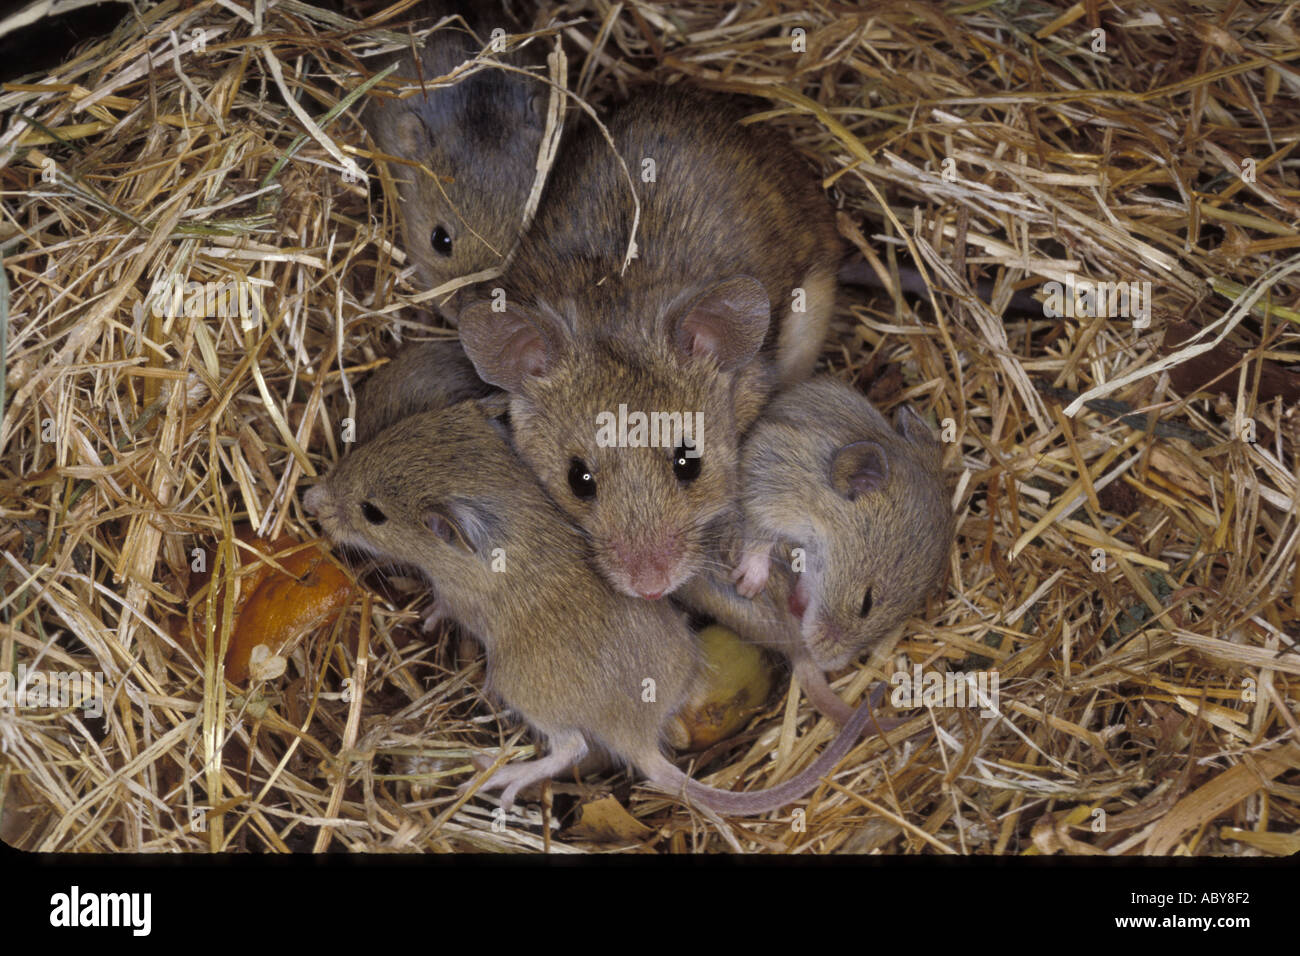 House mouse with babies Mus musculus Spain Sanz VISUAL WRITTEN Stock Photo